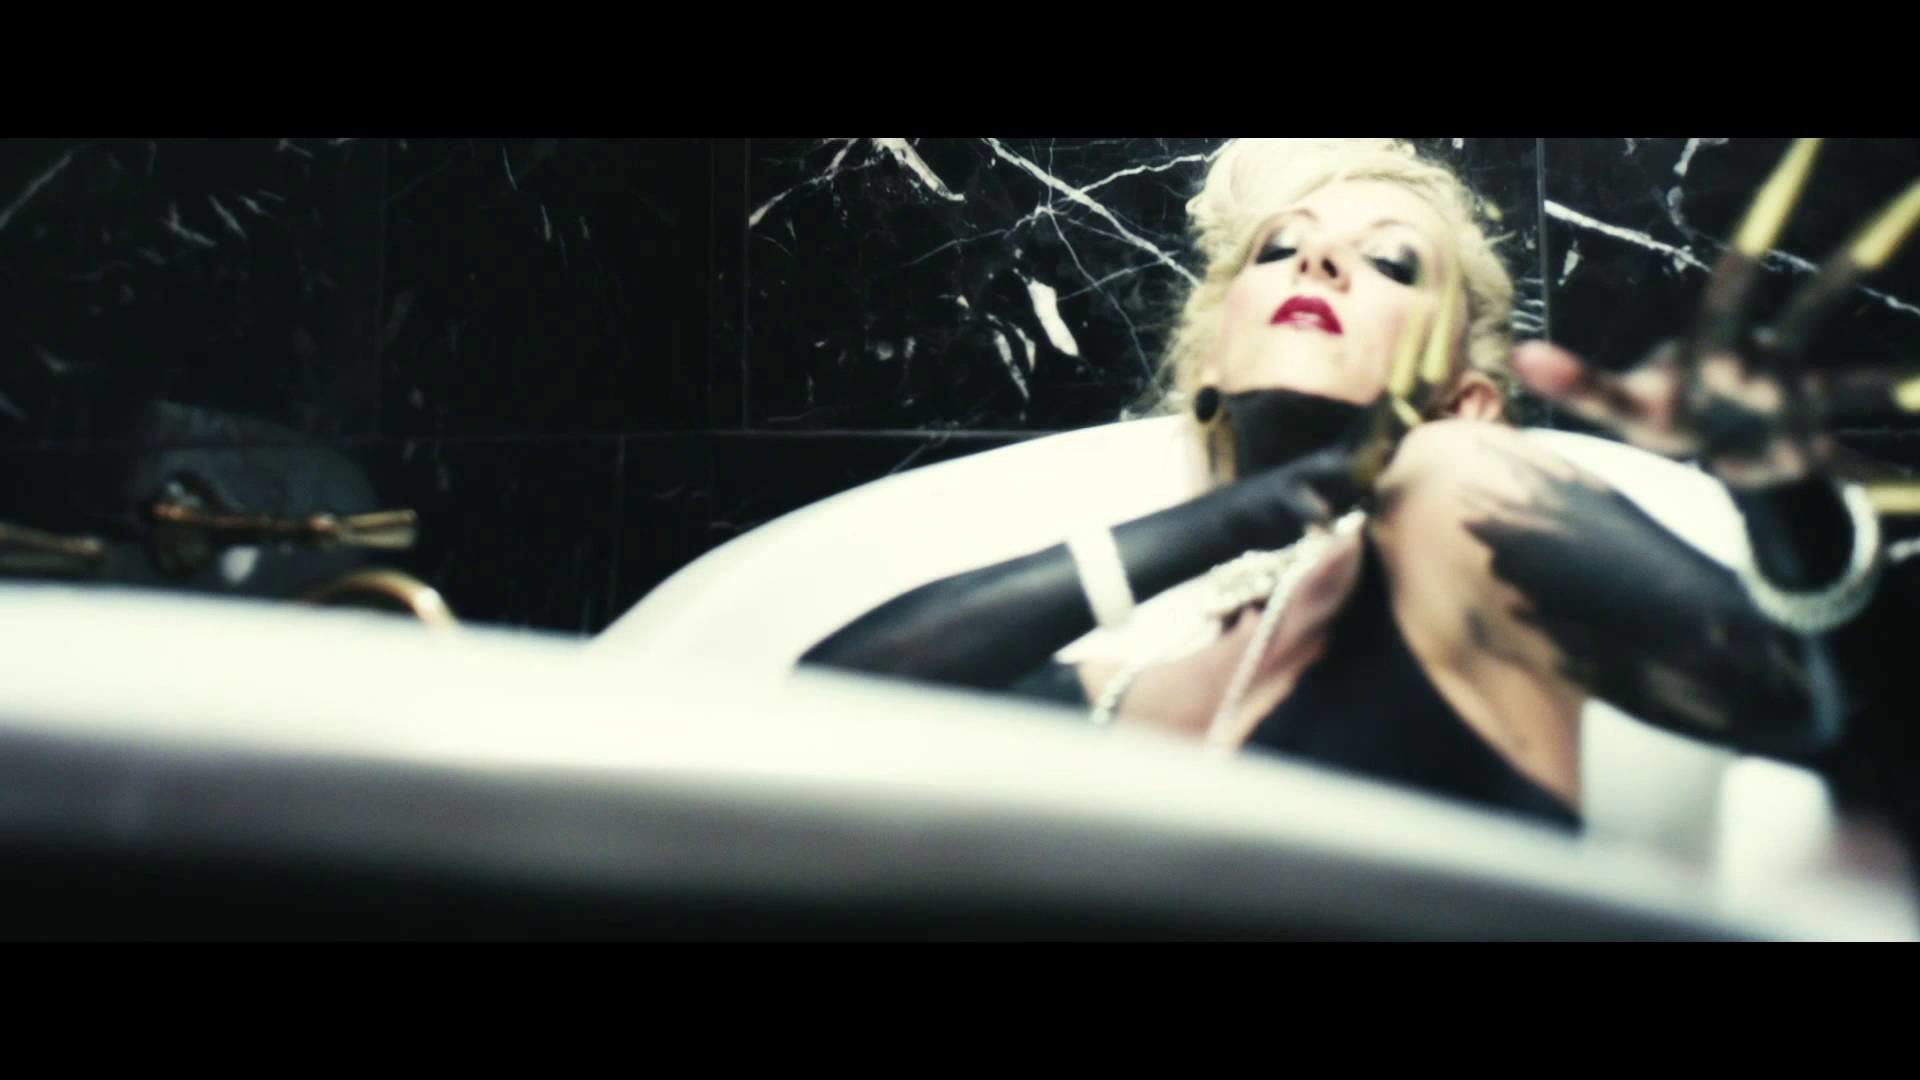 1920x1080 in this moment “sick like me” music video